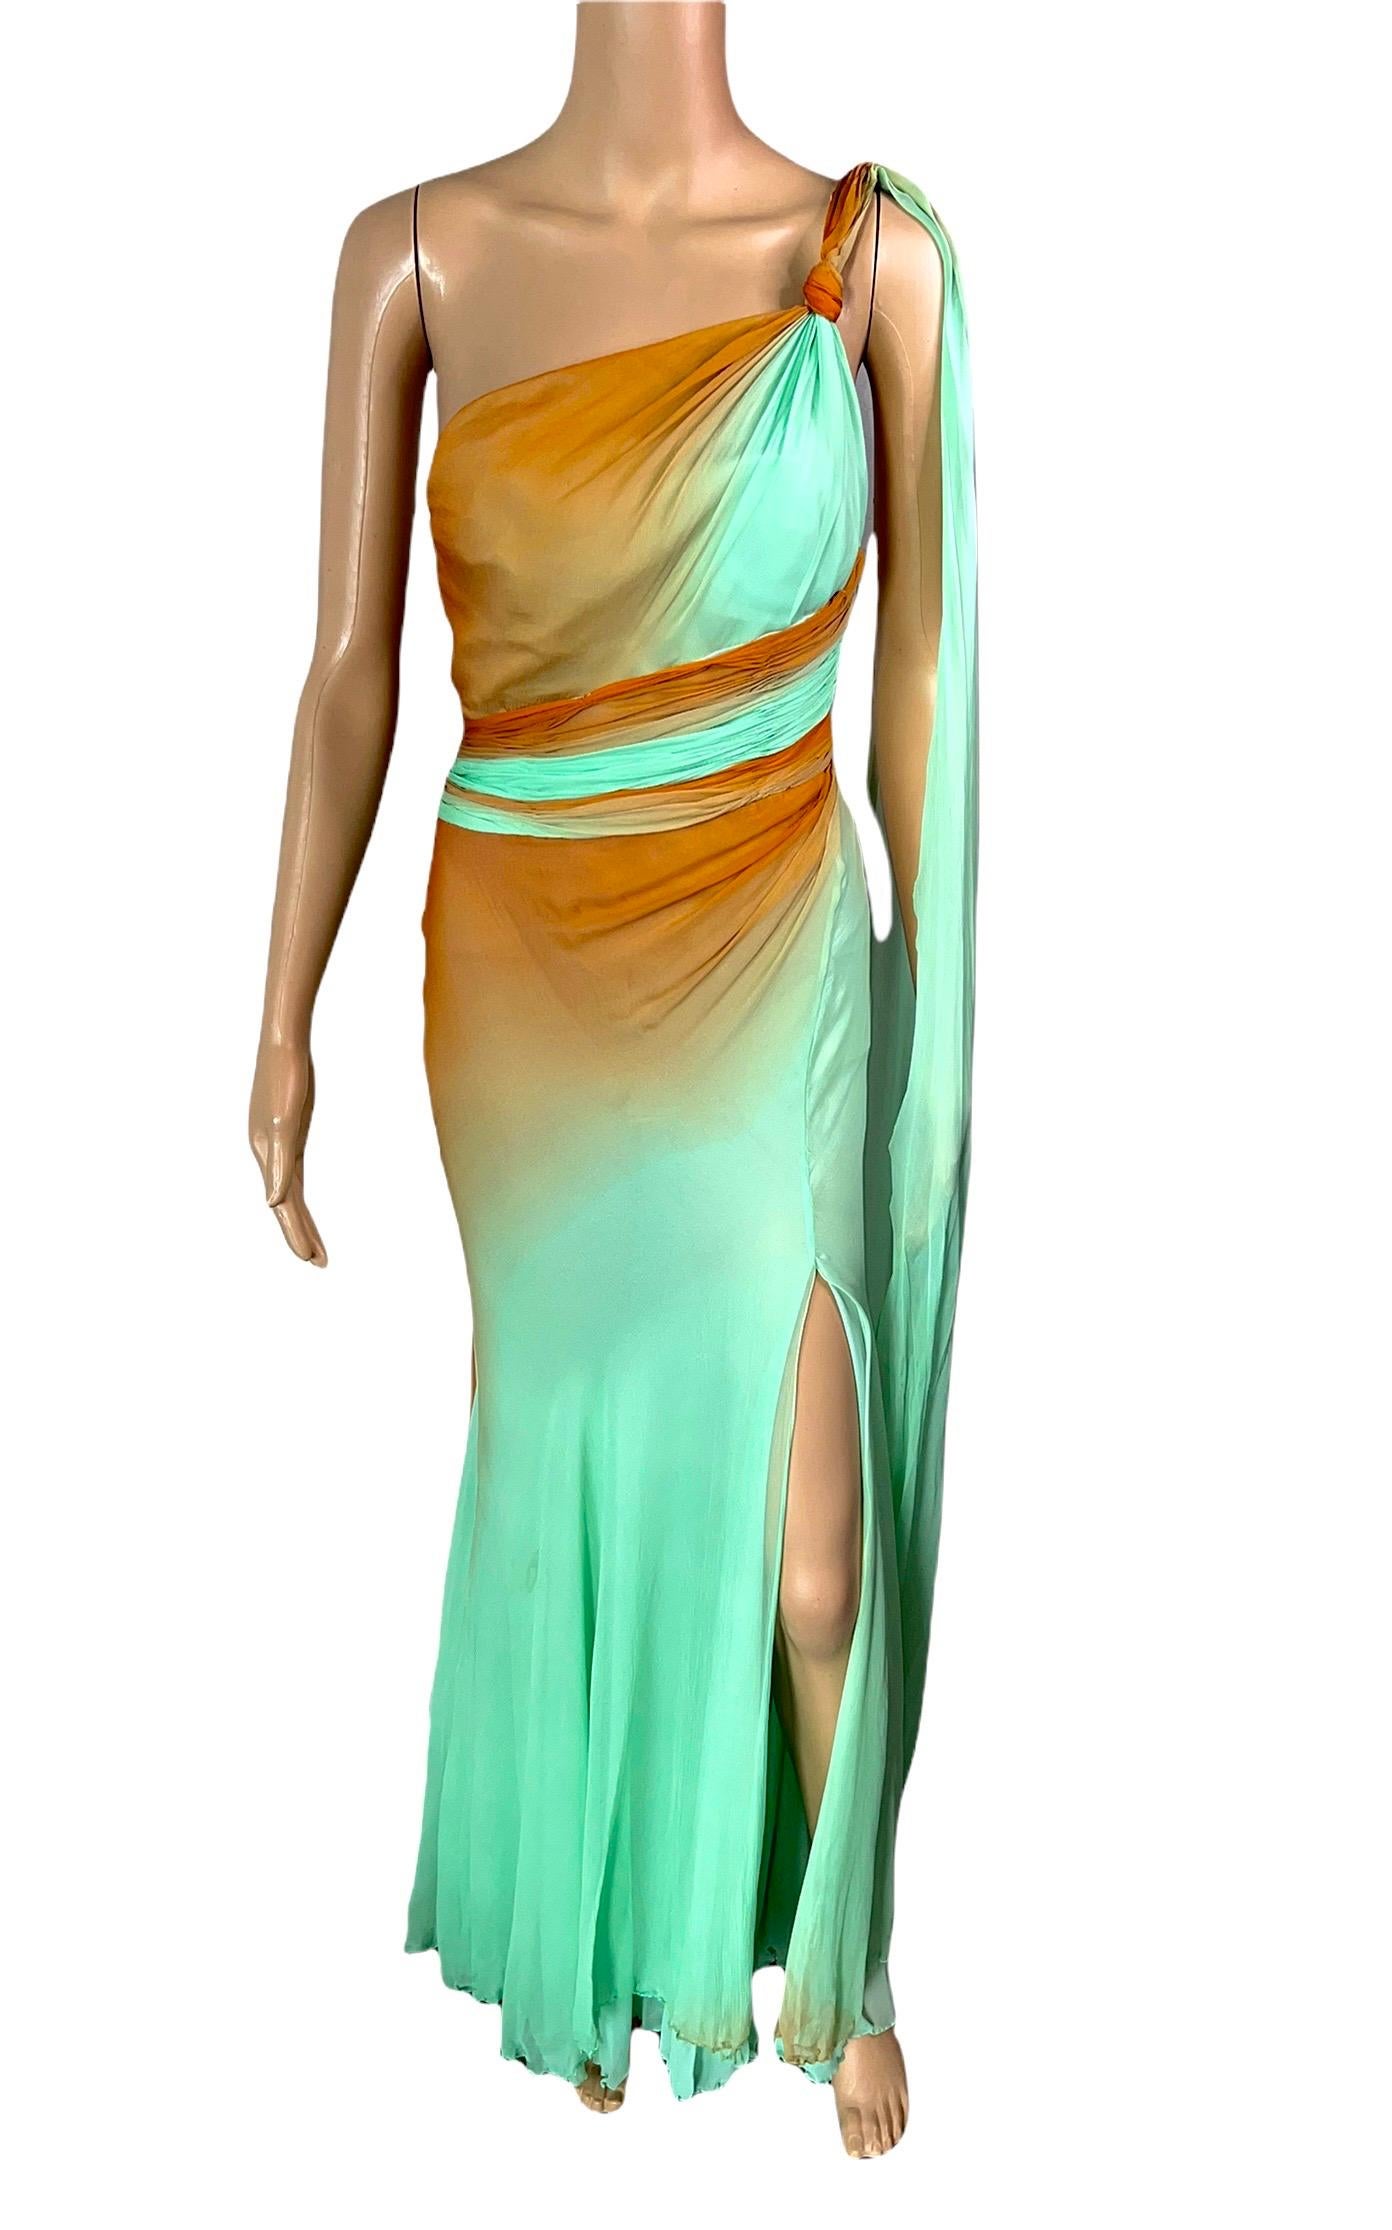 Versace S/S 2006 Runway One Shoulder Backless Ombre Train Evening Dress Gown IT 40

Look 43 from the Spring 2006 Collection.


